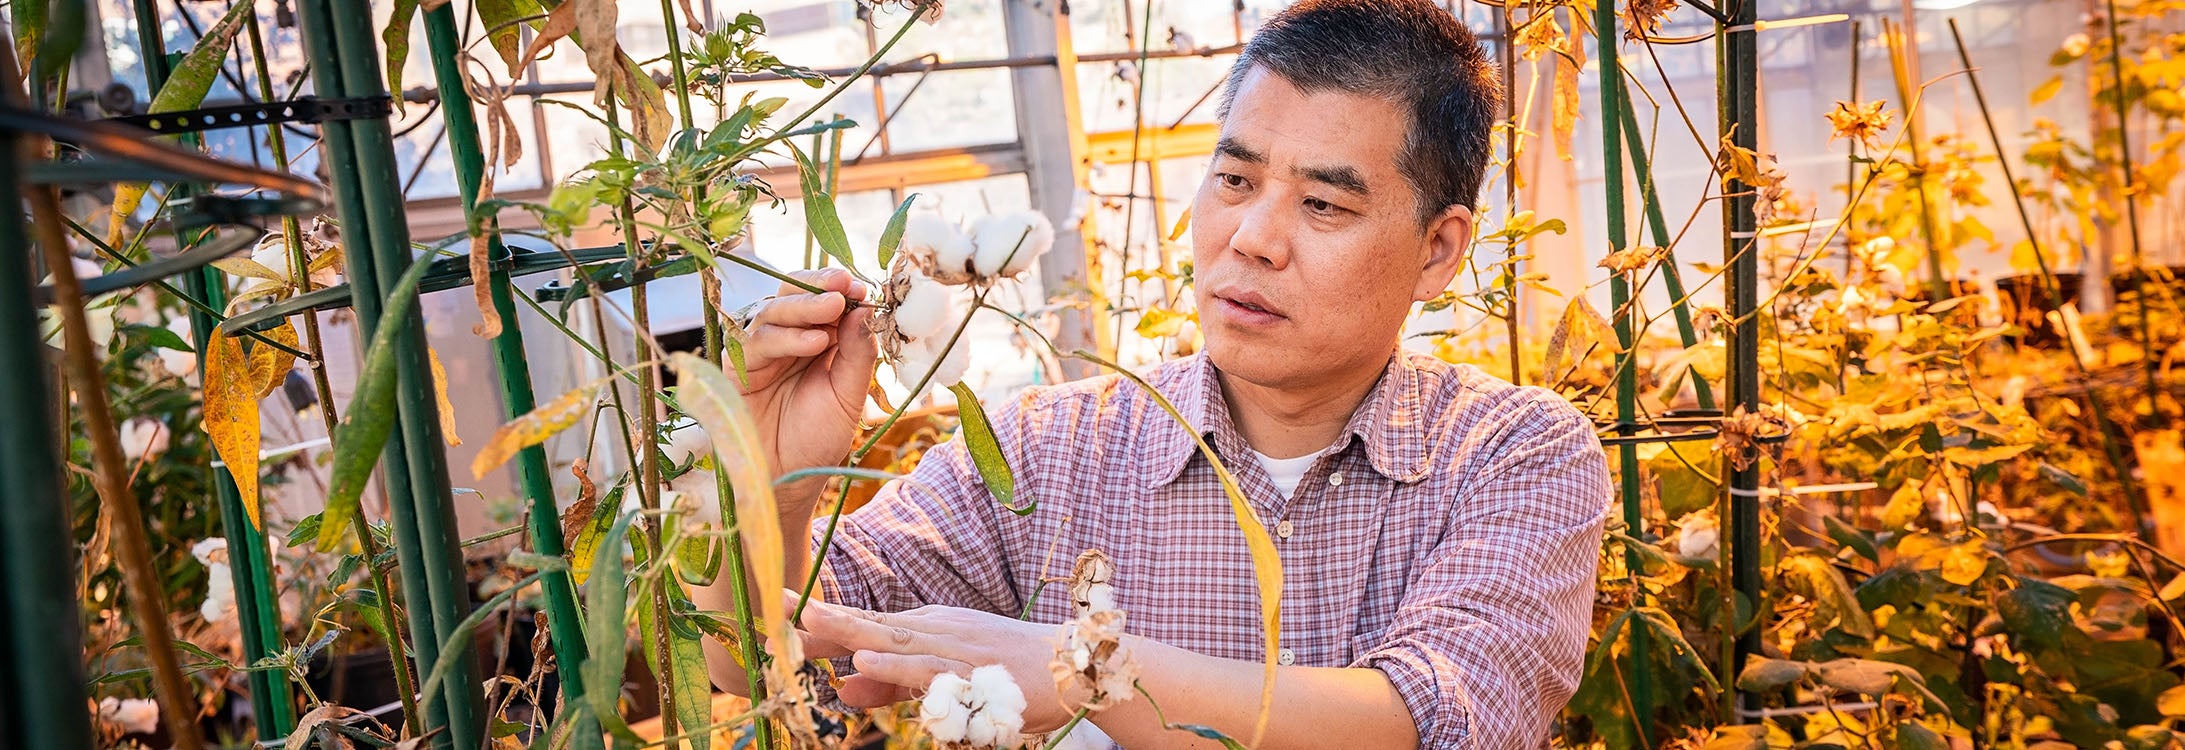 Dr. Baohong Zhang, whose research focuses on microRNAs and cotton biology, said if he can pinpoint which microRNAs and genes affect fiber growth, that knowledge can be used to produce higher crop yields.